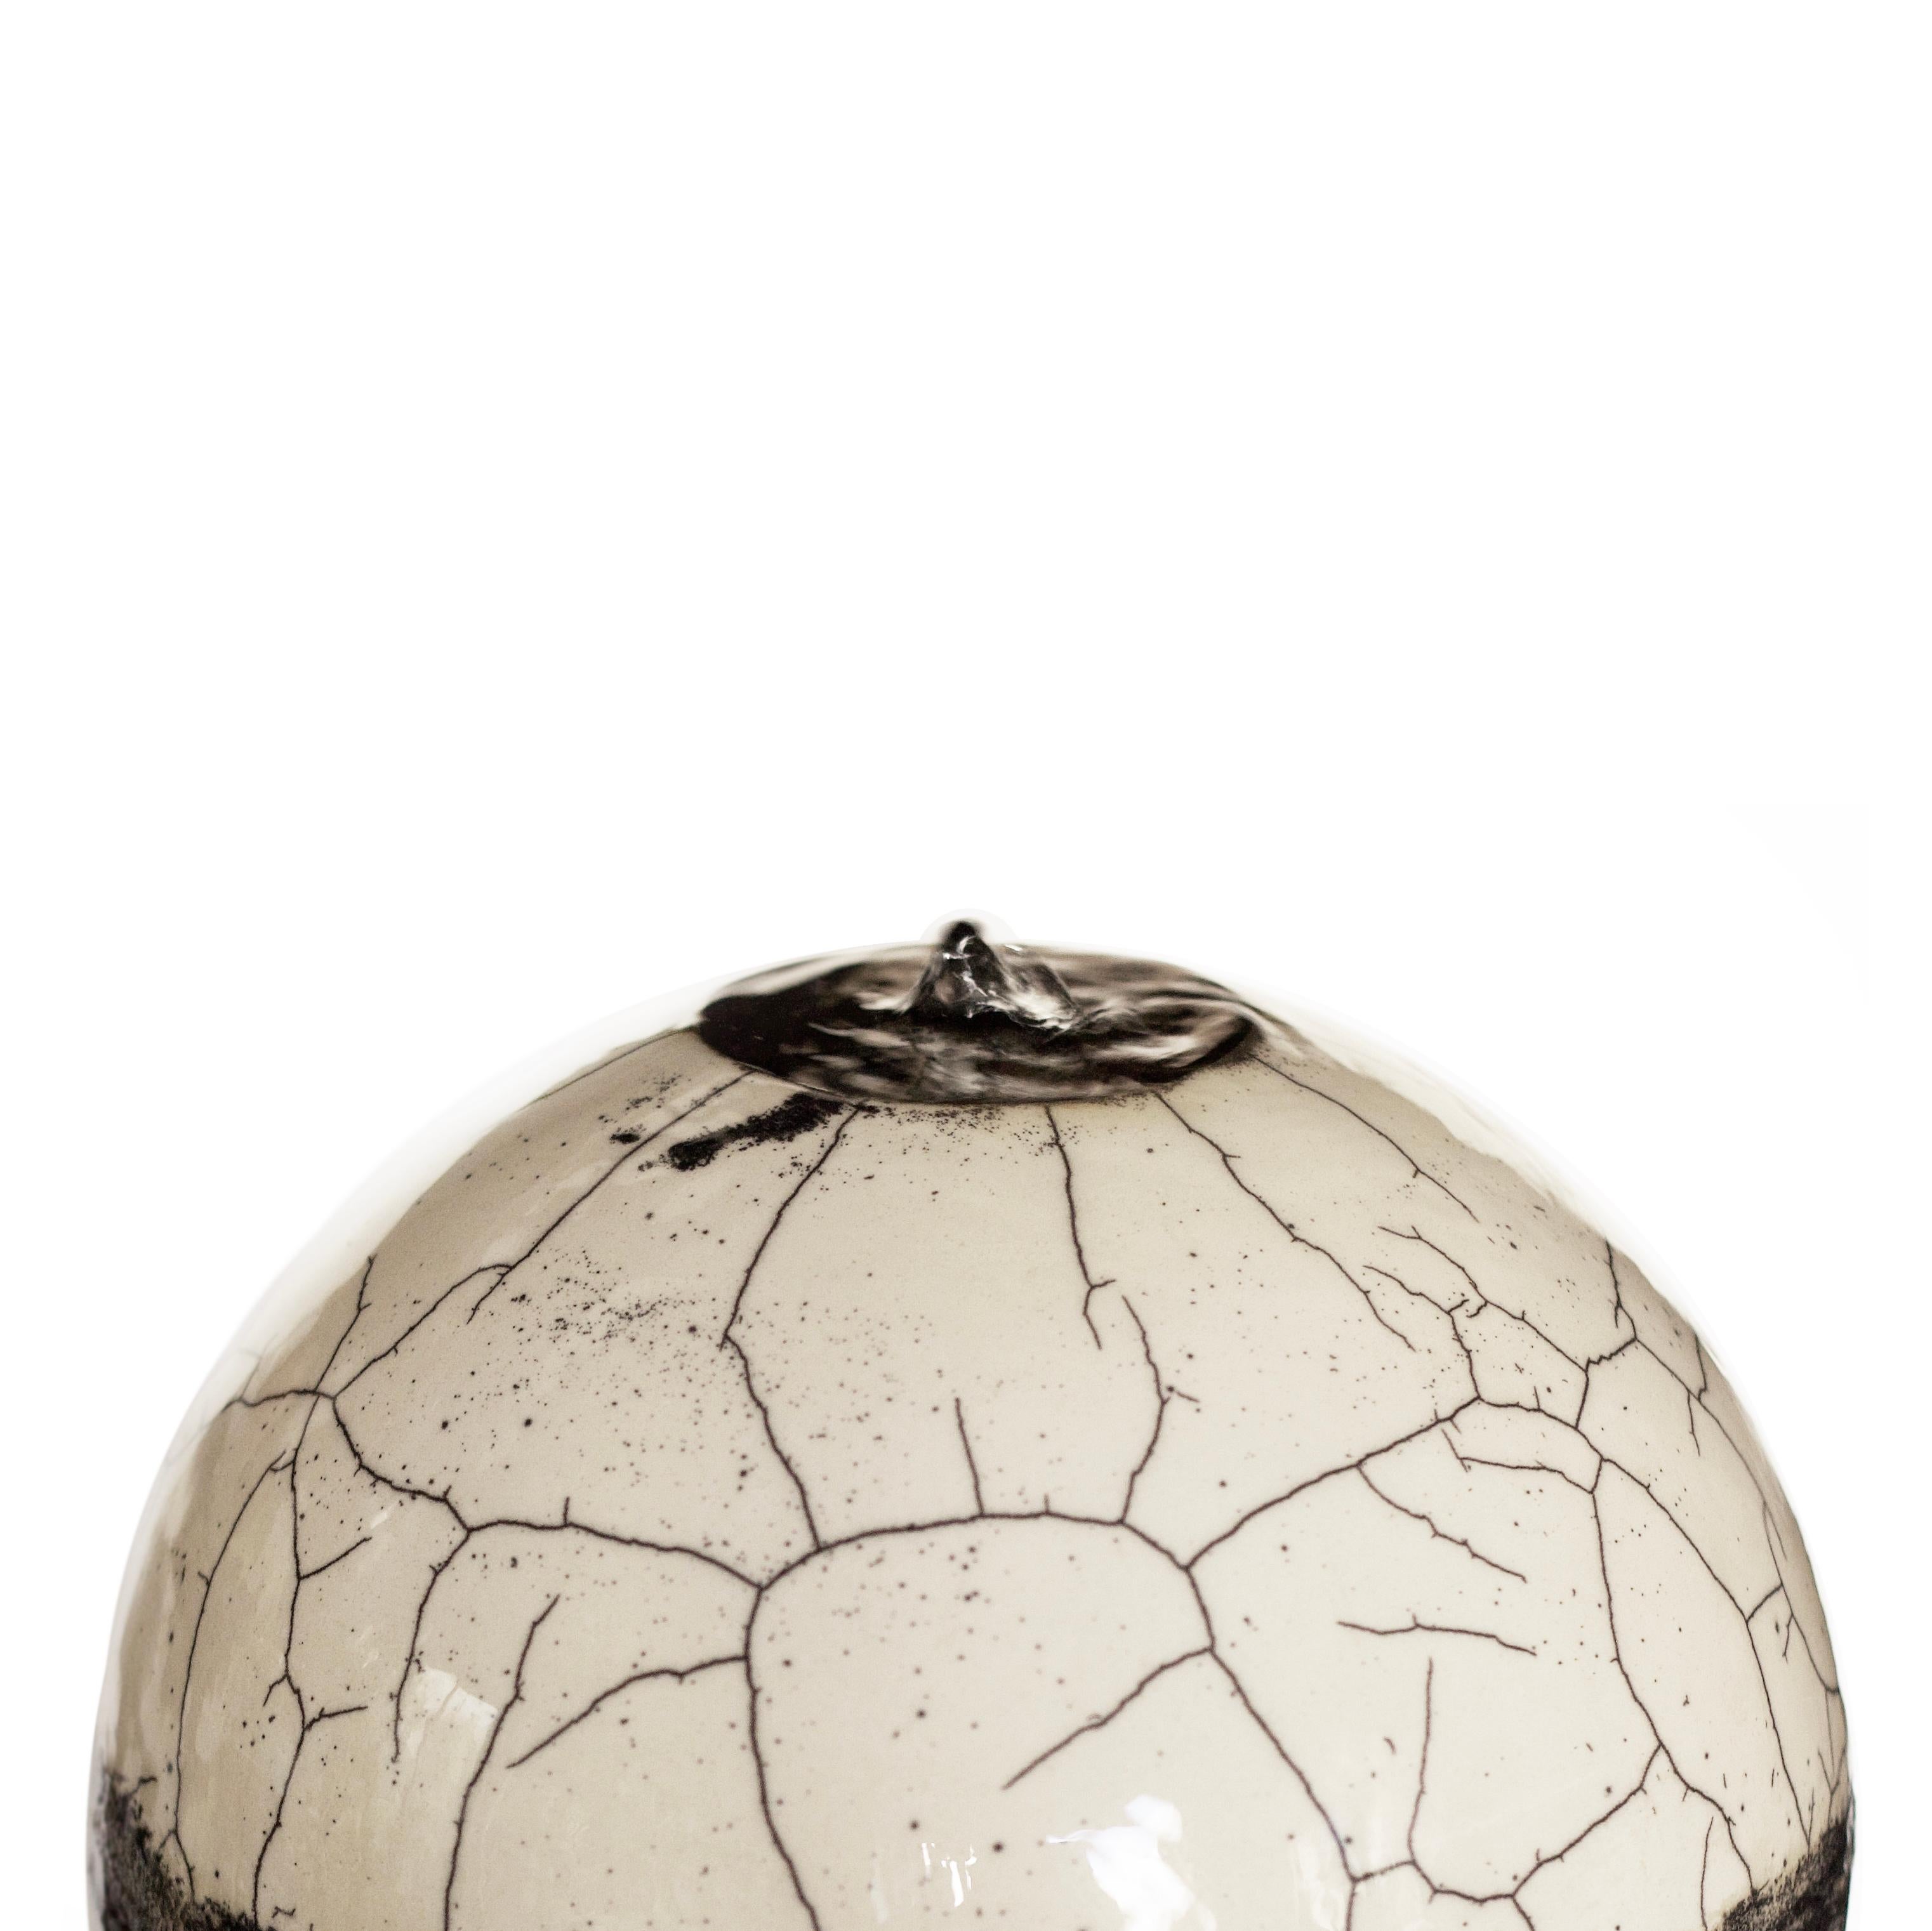 The mightiest of the Genesi fountains. Its large Raku components are already a masterpiece by themselves, combined in the form of this perpetual murmuring fountain become something mesmerizing and impactful in their circular design. The sphere